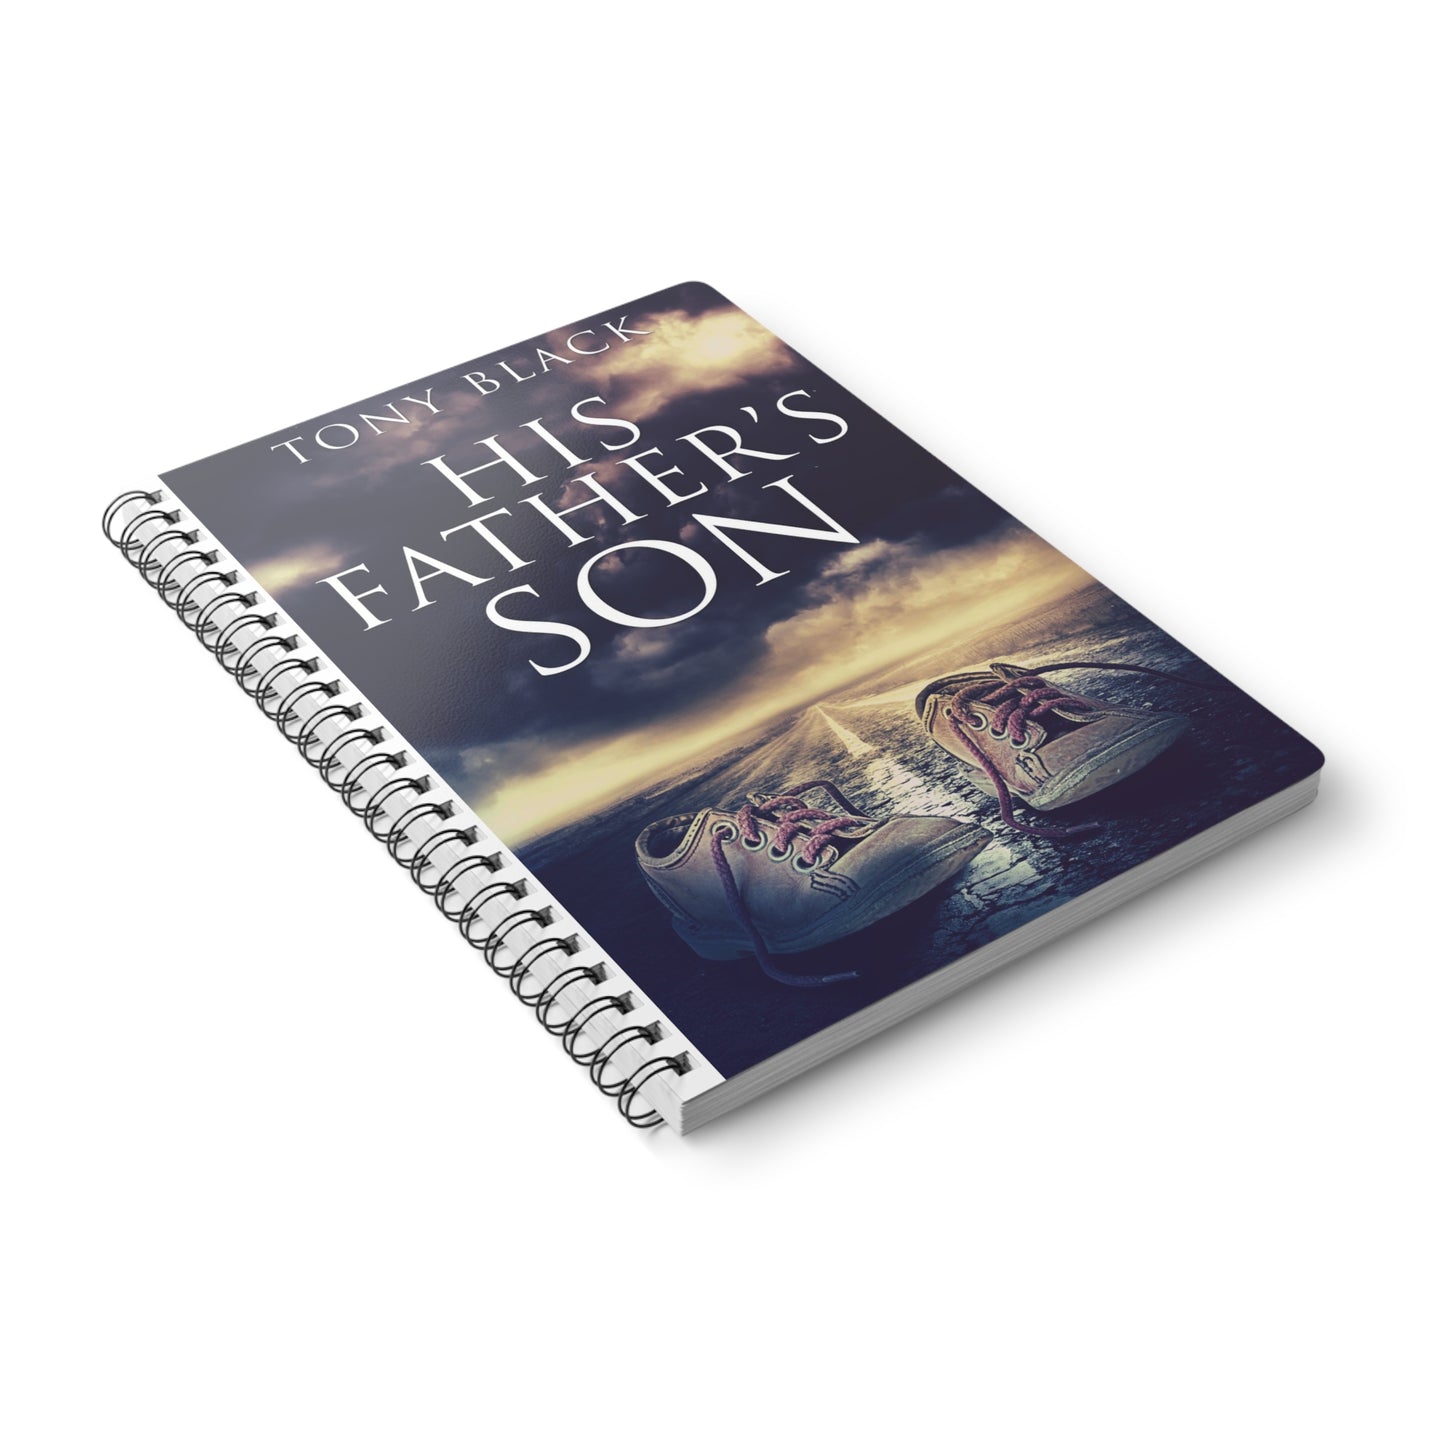 His Father's Son - A5 Wirebound Notebook